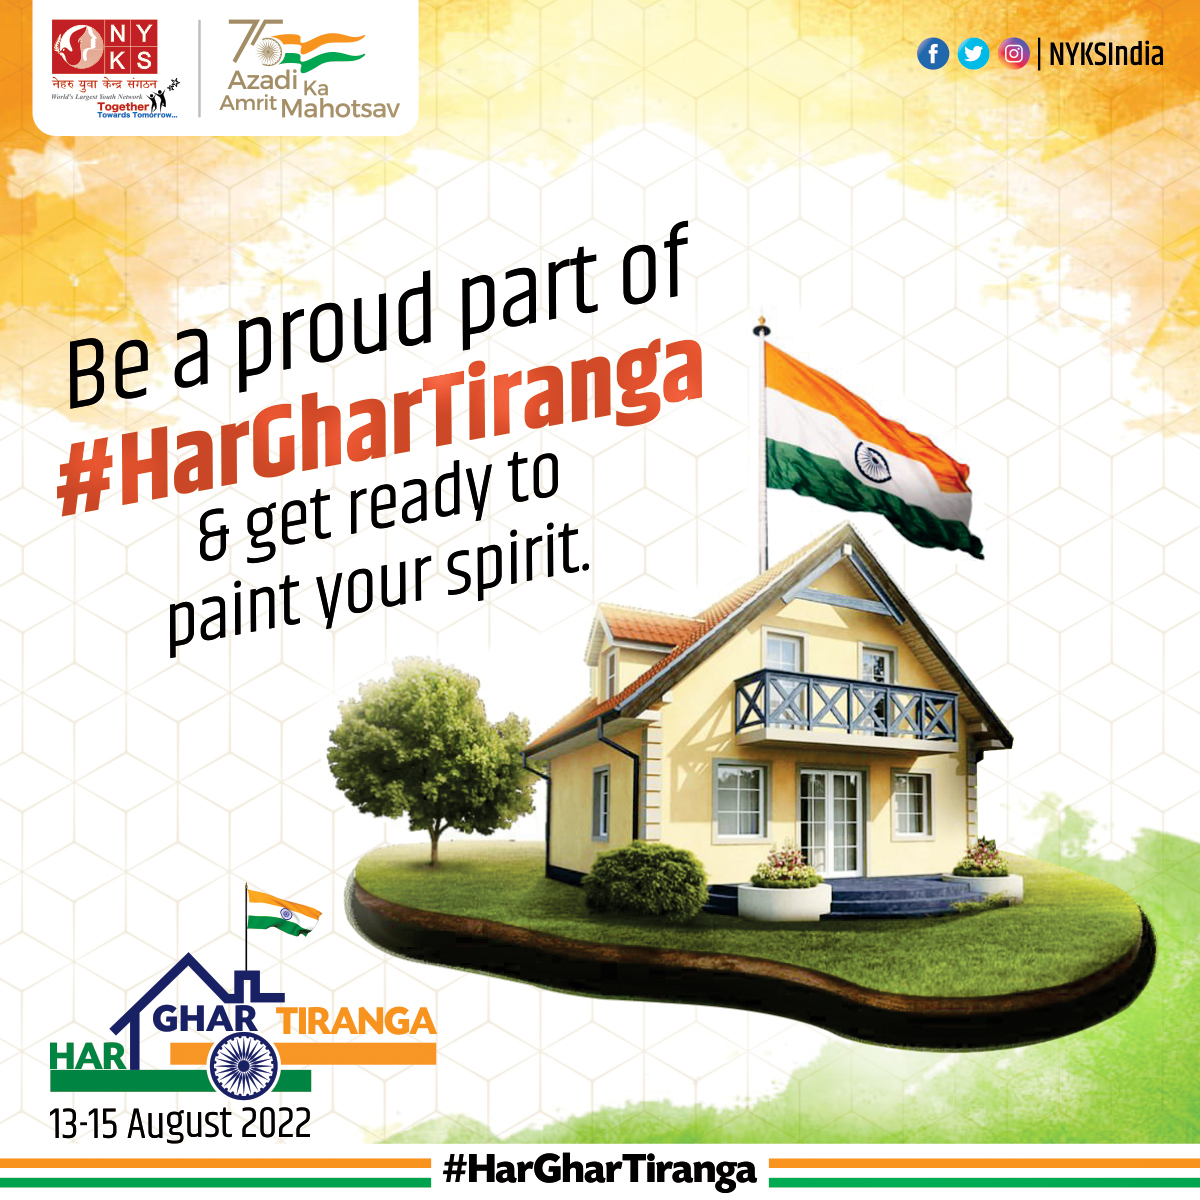 Come be a part of #HarGharTiranga from 13-15 Aug! Bring home the National Flag, proudly fly it & let the world know what it means to be a true Indian. #HarGharTiranga #JaiHind #AmritMahotsav #Tiranga